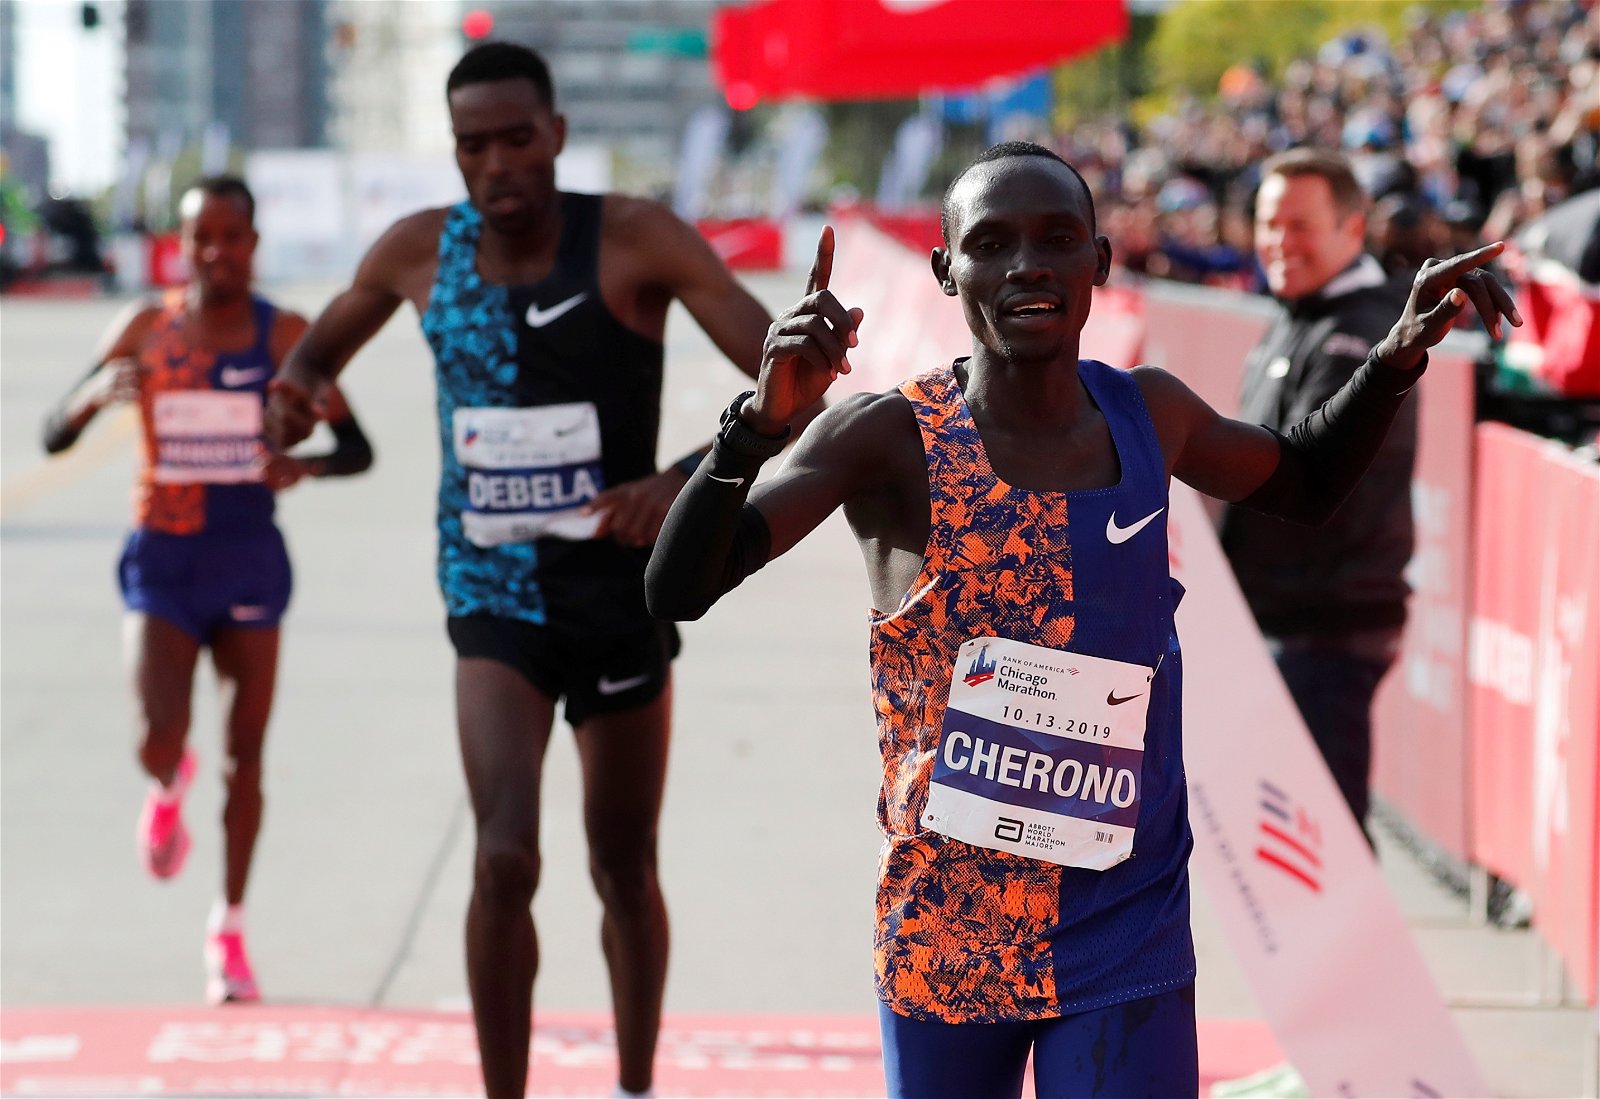 NYC Marathon Prize Money Winnings, Earnings and Other Details